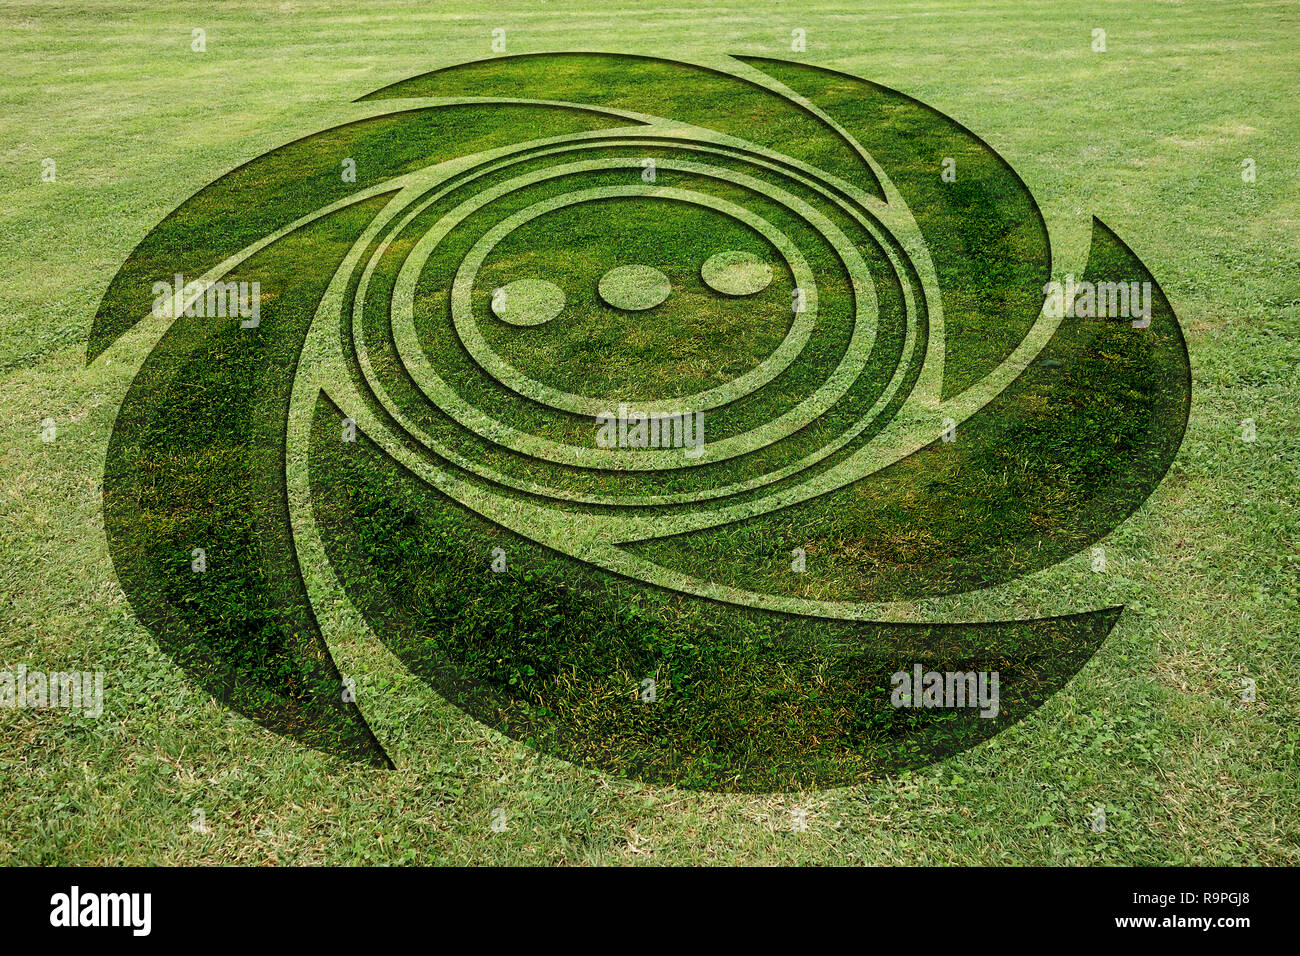 Concentric spiral circles fake crop circle in the meadow Stock Photo